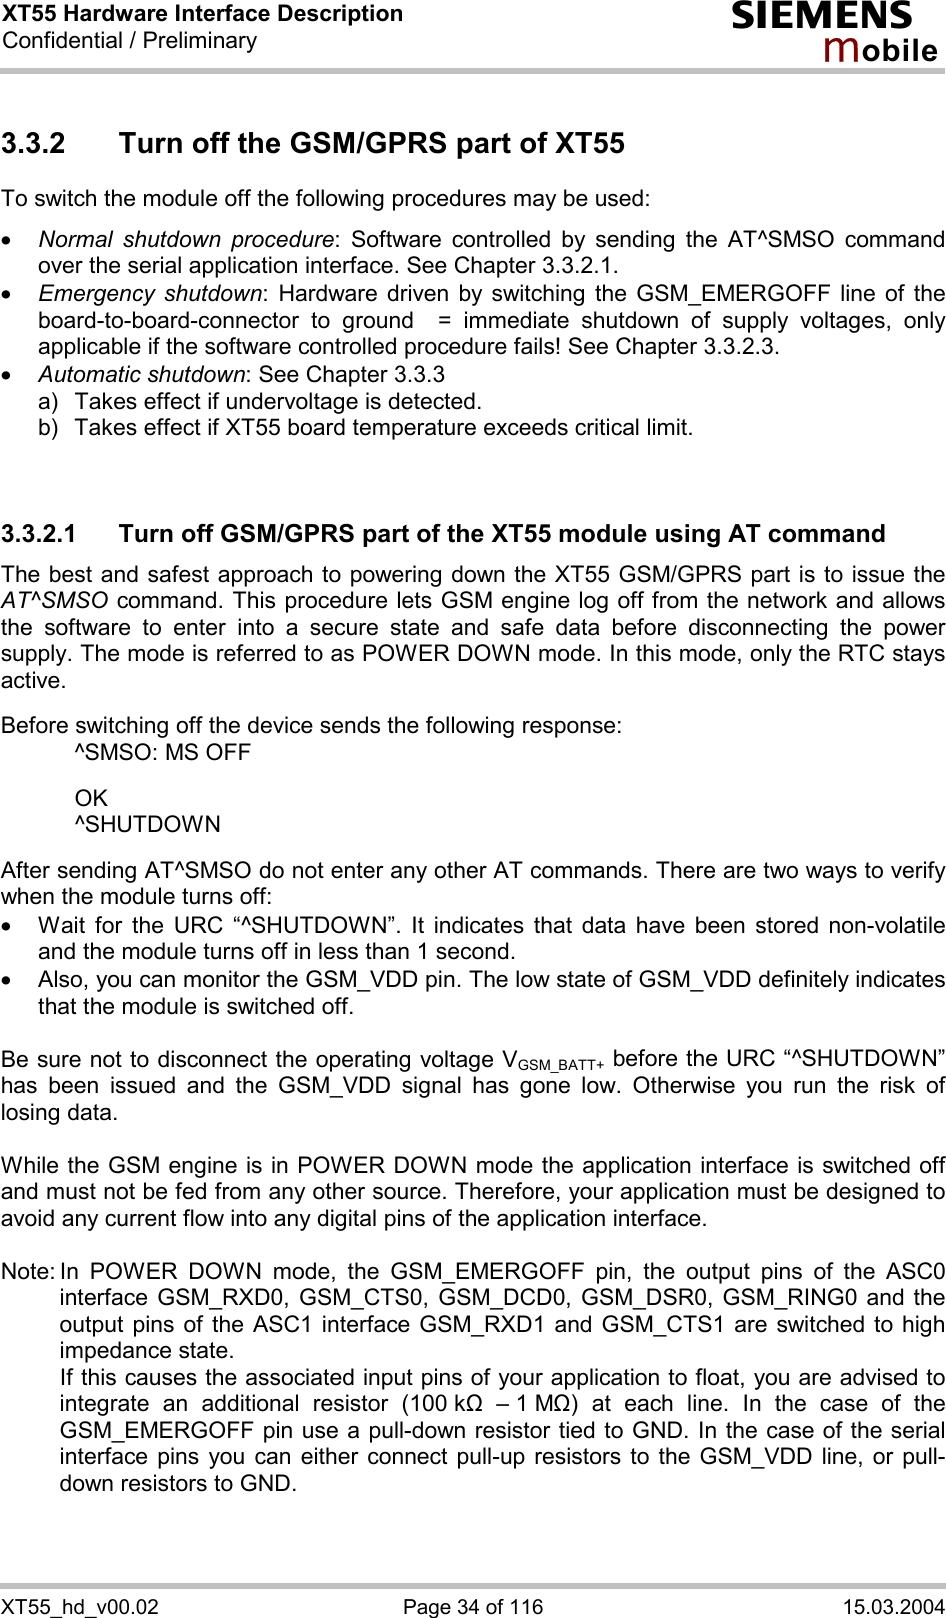 XT55 Hardware Interface Description Confidential / Preliminary s mo b i l e XT55_hd_v00.02  Page 34 of 116  15.03.2004 3.3.2  Turn off the GSM/GPRS part of XT55 To switch the module off the following procedures may be used:  ·  Normal shutdown procedure: Software controlled by sending the AT^SMSO command over the serial application interface. See Chapter 3.3.2.1. ·  Emergency shutdown: Hardware driven by switching the GSM_EMERGOFF line of the board-to-board-connector to ground  = immediate shutdown of supply voltages, only applicable if the software controlled procedure fails! See Chapter 3.3.2.3. ·  Automatic shutdown: See Chapter 3.3.3 a)   Takes effect if undervoltage is detected.  b)  Takes effect if XT55 board temperature exceeds critical limit.   3.3.2.1  Turn off GSM/GPRS part of the XT55 module using AT command The best and safest approach to powering down the XT55 GSM/GPRS part is to issue the AT^SMSO command. This procedure lets GSM engine log off from the network and allows the software to enter into a secure state and safe data before disconnecting the power supply. The mode is referred to as POWER DOWN mode. In this mode, only the RTC stays active.  Before switching off the device sends the following response:    ^SMSO: MS OFF    OK   ^SHUTDOWN  After sending AT^SMSO do not enter any other AT commands. There are two ways to verify when the module turns off:  ·  Wait for the URC “^SHUTDOWN”. It indicates that data have been stored non-volatile and the module turns off in less than 1 second. ·  Also, you can monitor the GSM_VDD pin. The low state of GSM_VDD definitely indicates that the module is switched off.  Be sure not to disconnect the operating voltage VGSM_BATT+ before the URC “^SHUTDOWN” has been issued and the GSM_VDD signal has gone low. Otherwise you run the risk of losing data.   While the GSM engine is in POWER DOWN mode the application interface is switched off and must not be fed from any other source. Therefore, your application must be designed to avoid any current flow into any digital pins of the application interface.   Note: In POWER DOWN mode, the GSM_EMERGOFF pin, the output pins of the ASC0 interface GSM_RXD0, GSM_CTS0, GSM_DCD0, GSM_DSR0, GSM_RING0 and the output pins of the ASC1 interface GSM_RXD1 and GSM_CTS1 are switched to high impedance state.    If this causes the associated input pins of your application to float, you are advised to integrate an additional resistor (100 k&quot;  – 1 M&quot;) at each line. In the case of the GSM_EMERGOFF pin use a pull-down resistor tied to GND. In the case of the serial interface pins you can either connect pull-up resistors to the GSM_VDD line, or pull-down resistors to GND.  